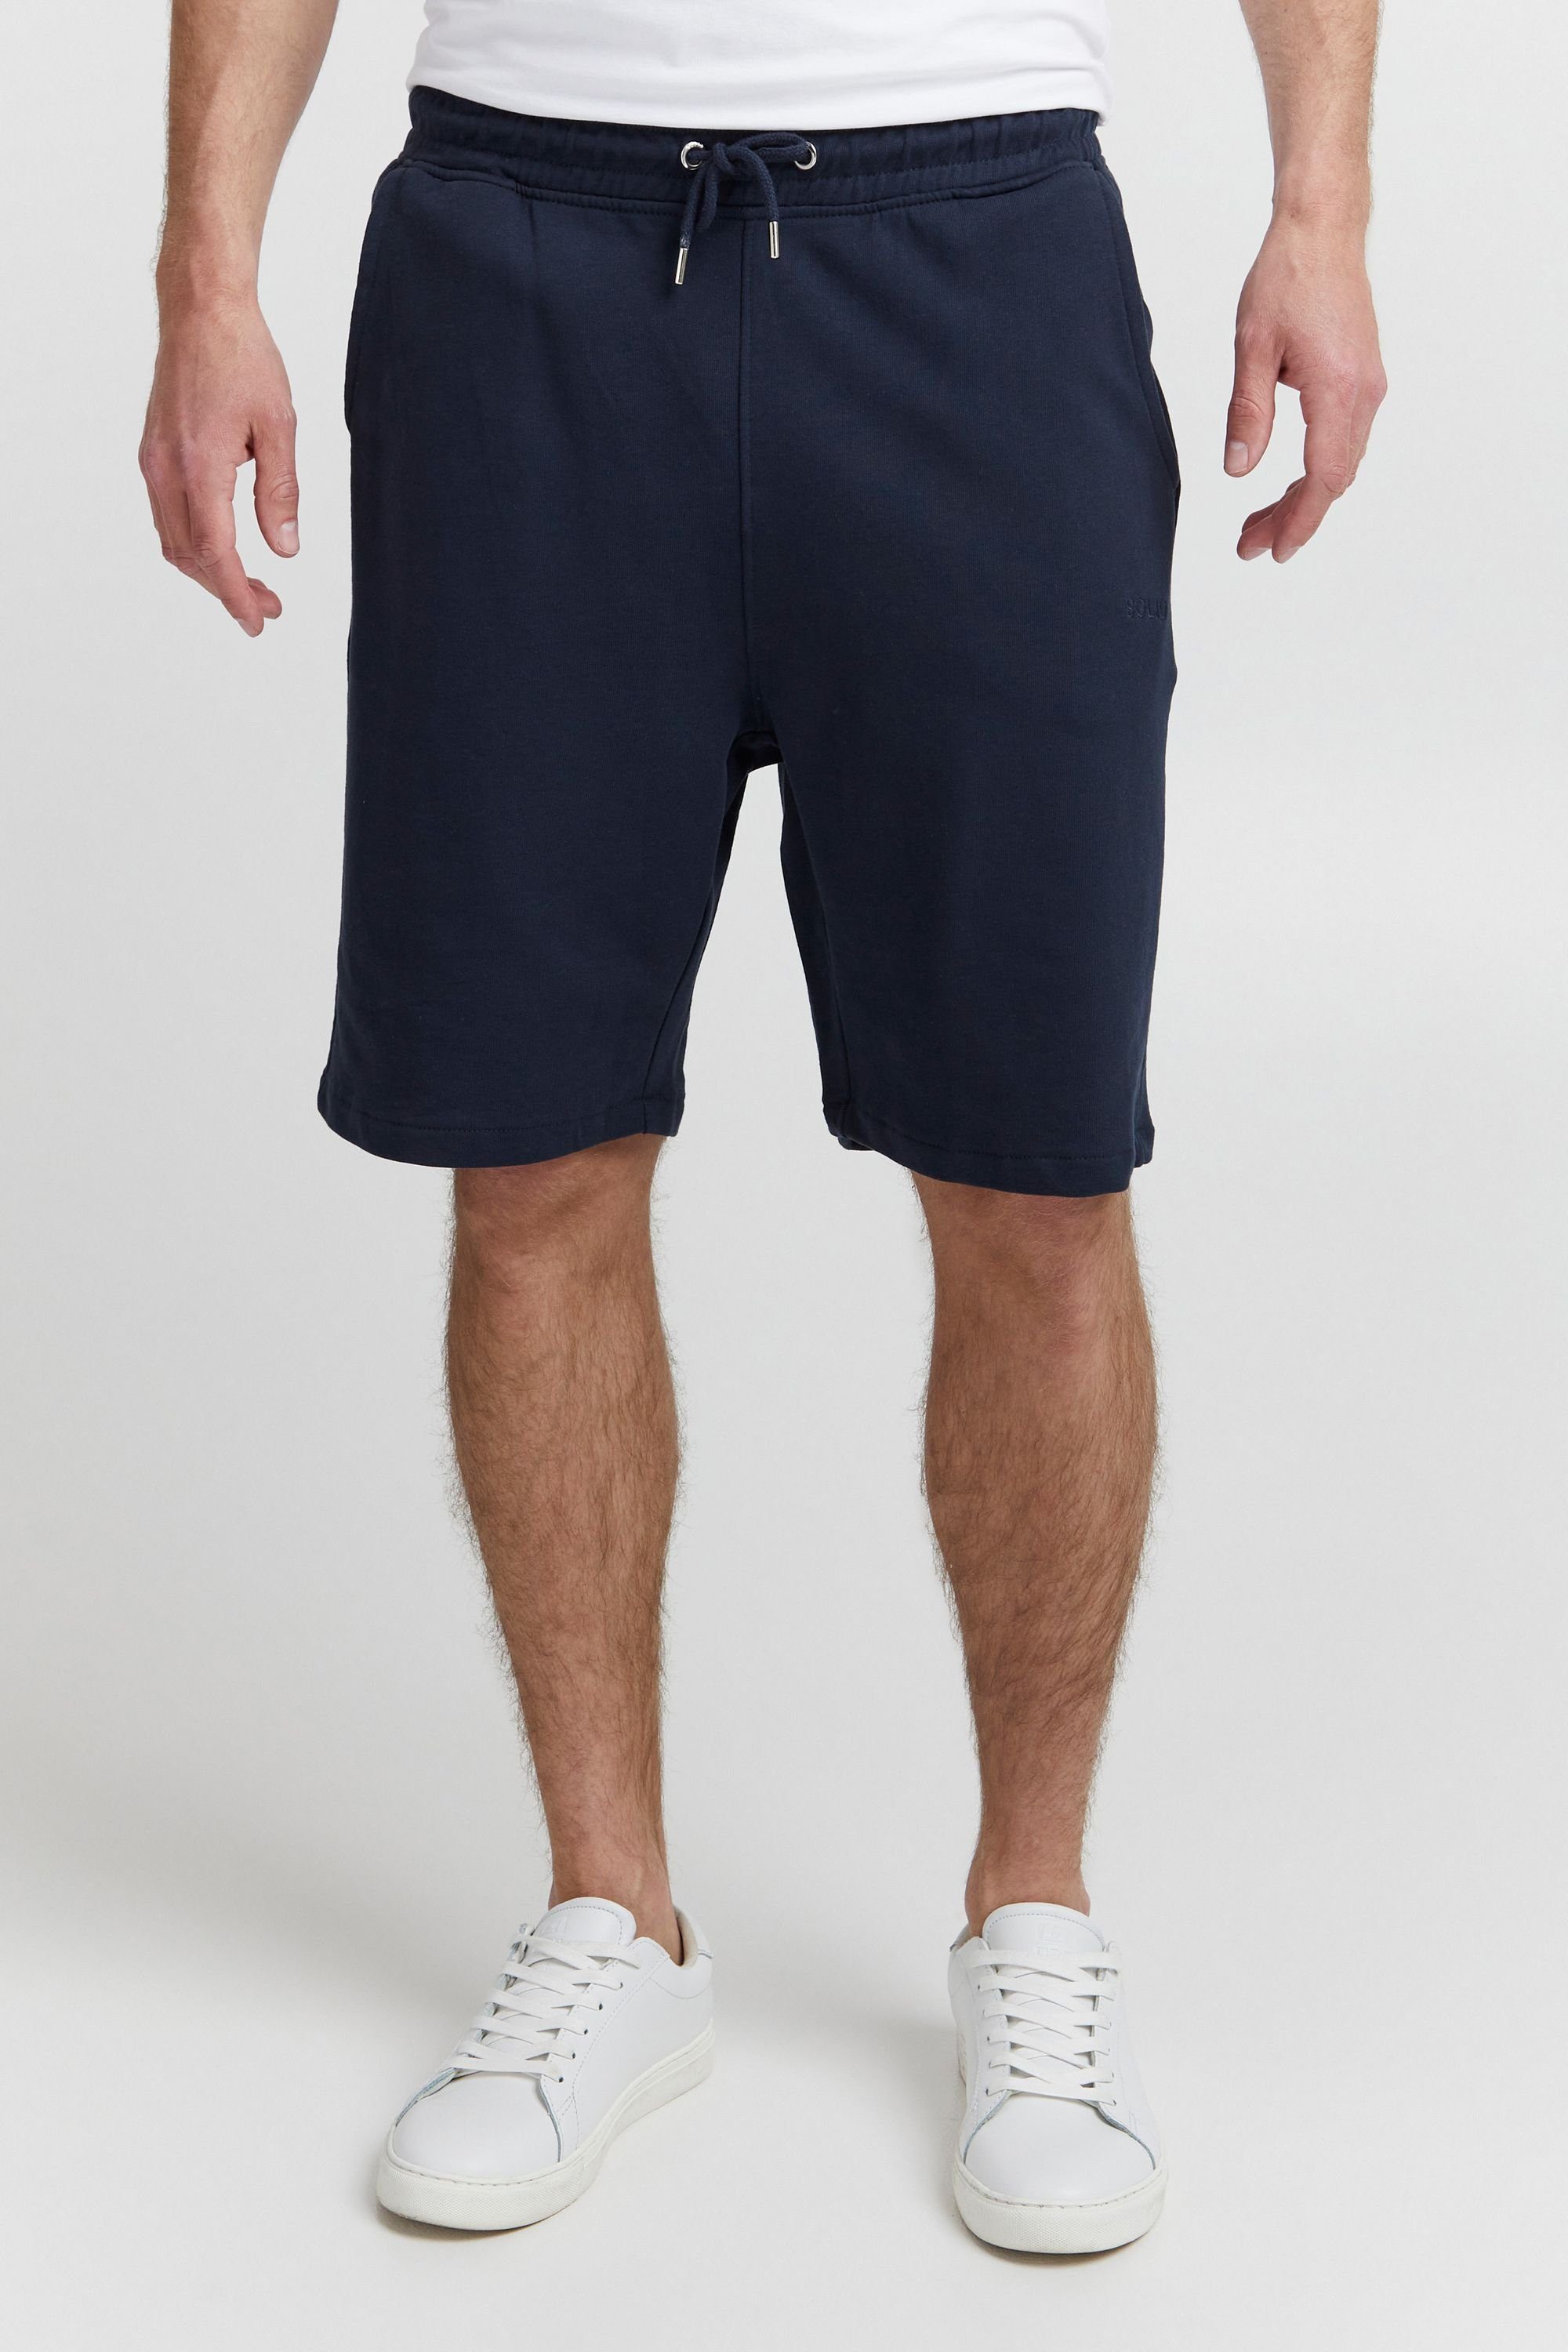 Solid Relaxshorts 21106991 (194010) SDBrenden - SHO BLUE INSIGNIA